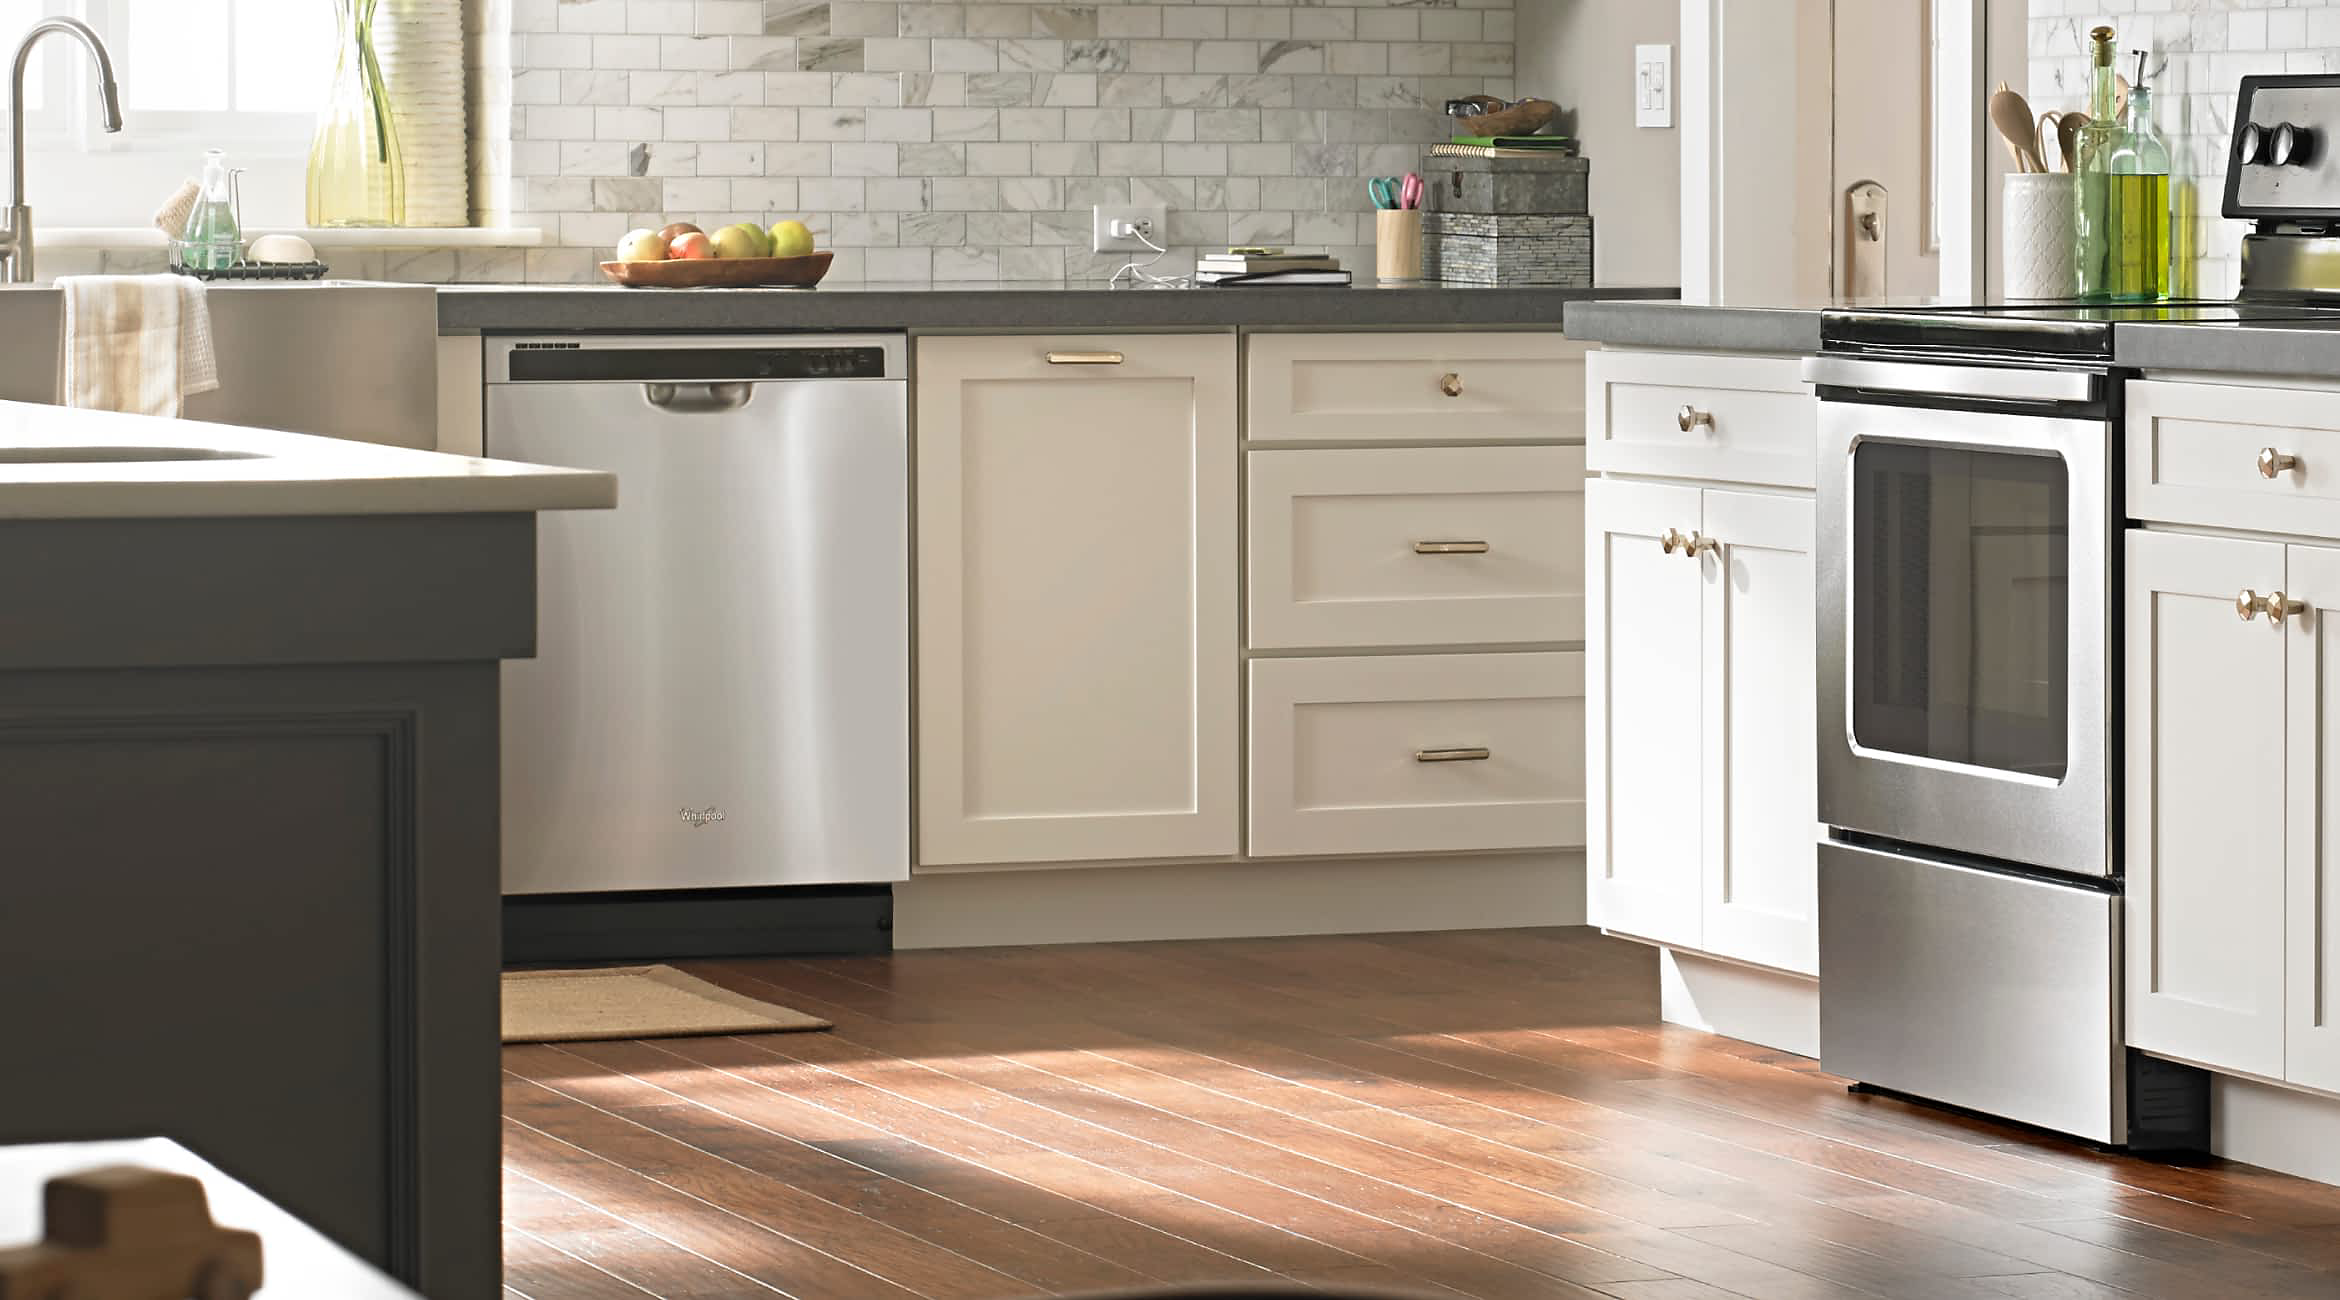 A Whirlpool® Starter Dishwasher in a kitchen with white cabinets